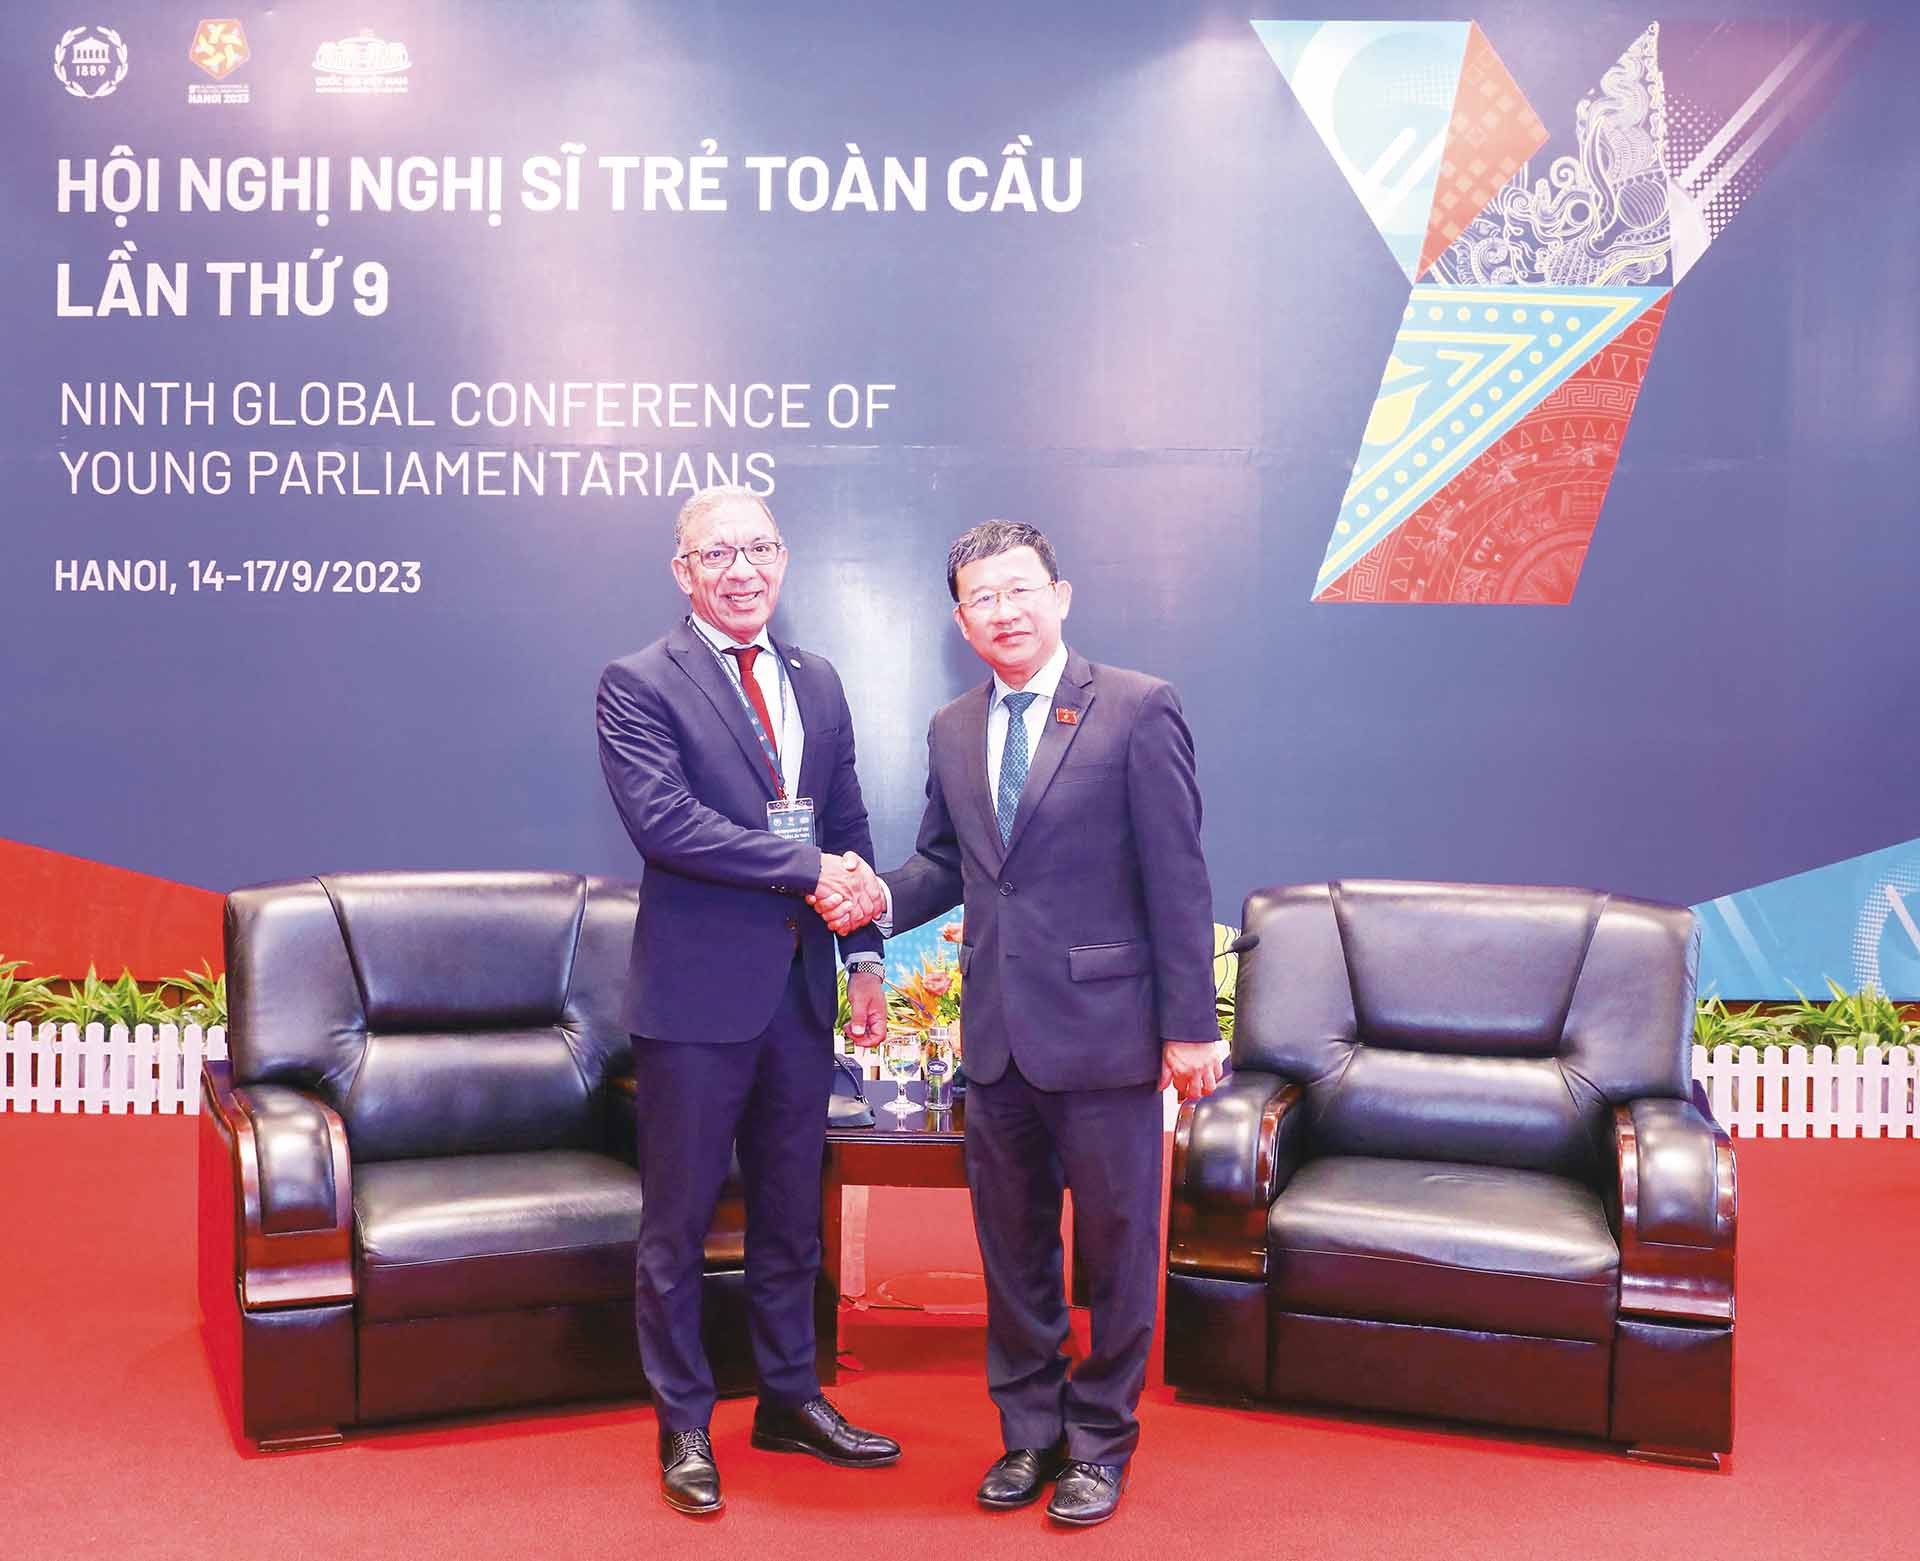 Chairman of the National Assembly’s Foreign Affairs Committee received international guest on the occations of the 9th Global Young Parliamentarians Conference, September 2023.